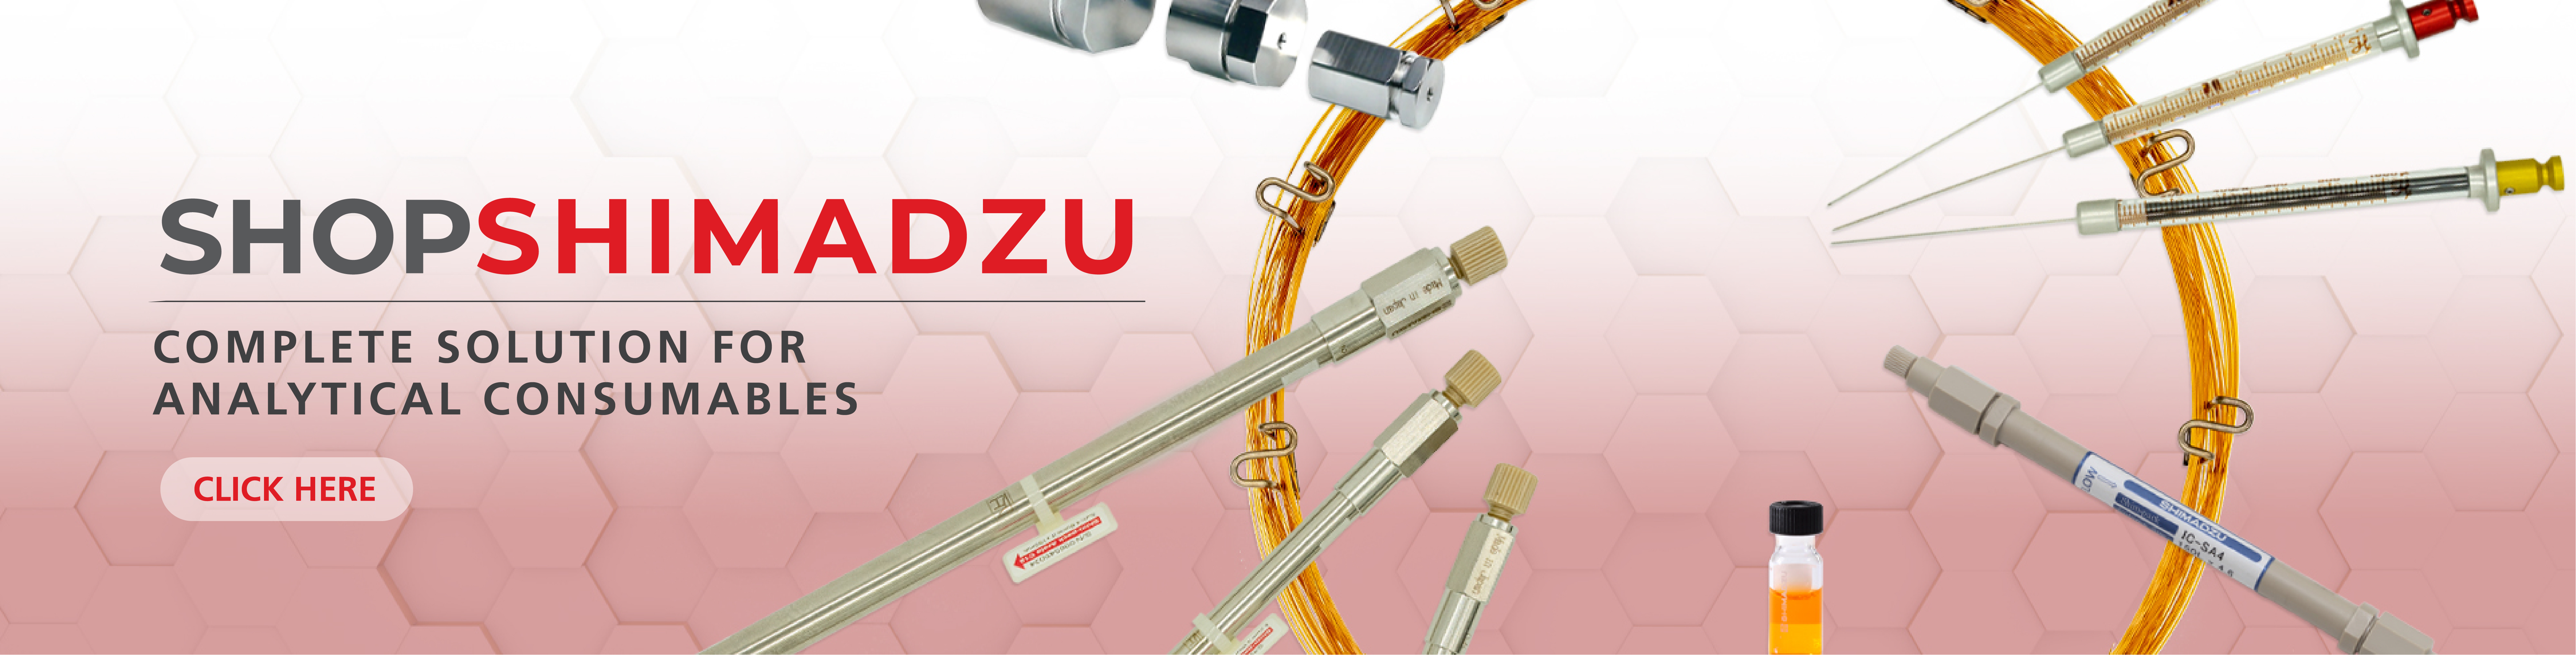 ShopShimadzu, Complete Solution for Analytical Consumables